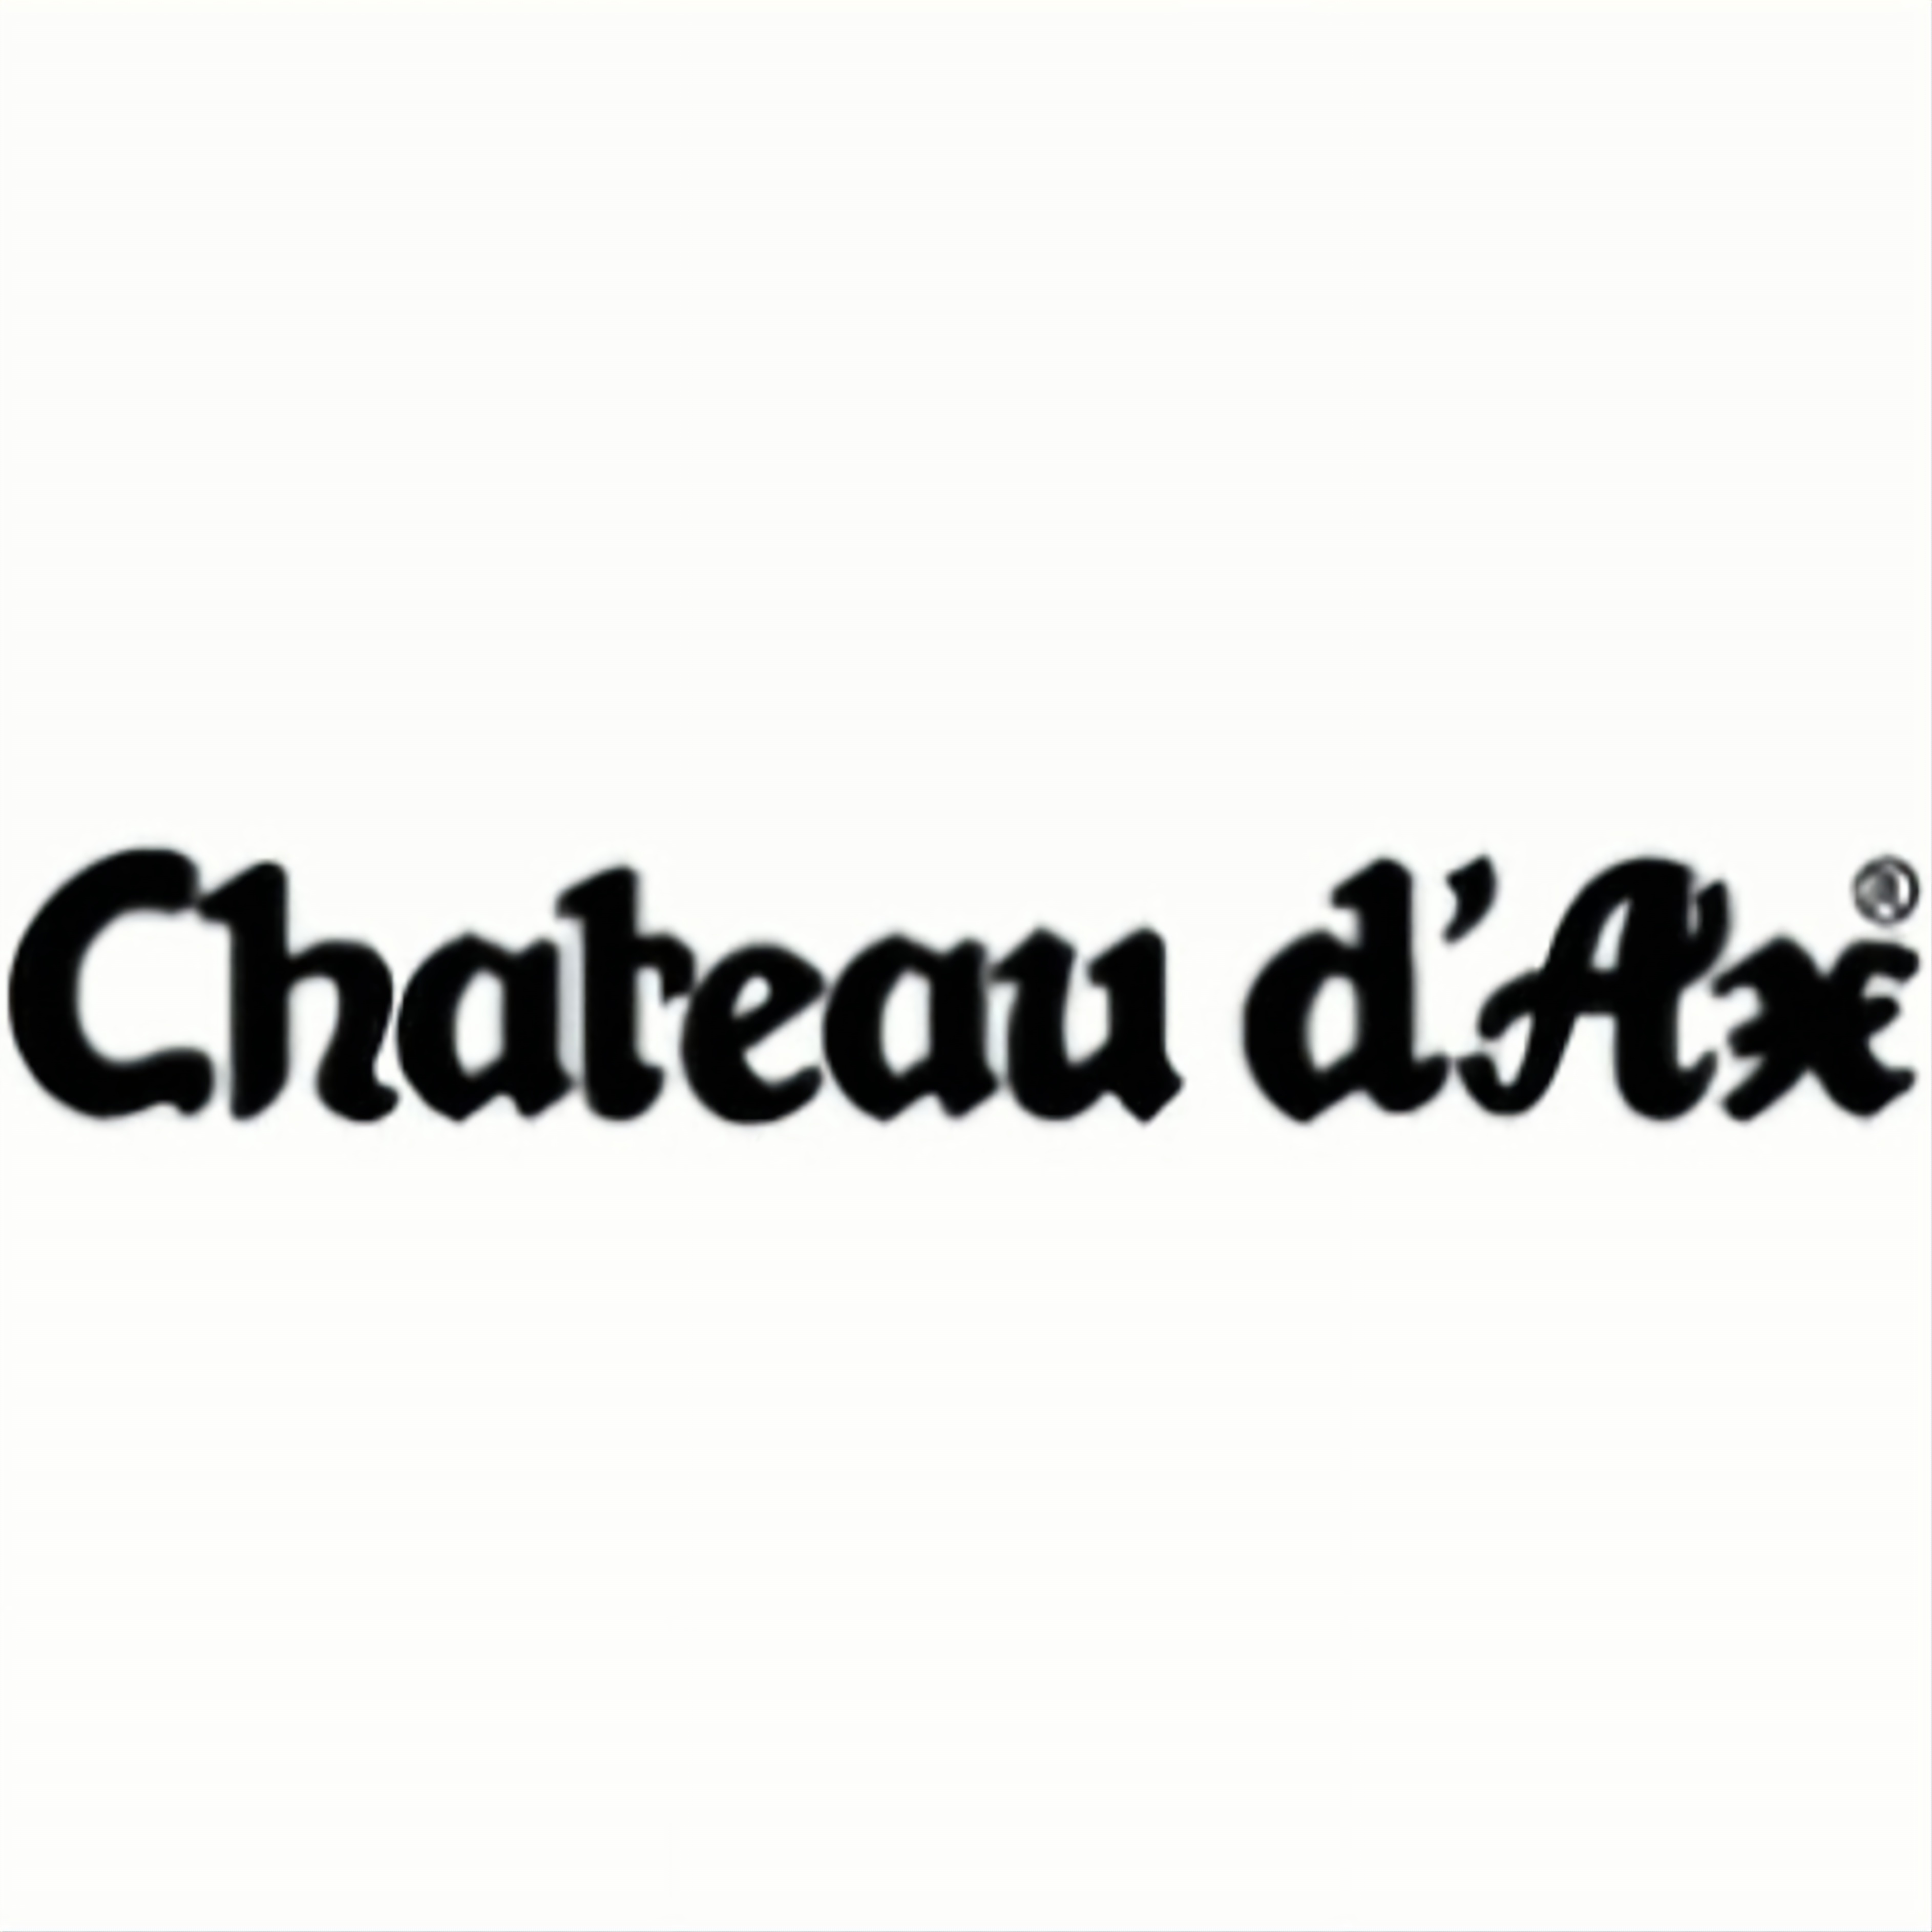 ChateaudAx